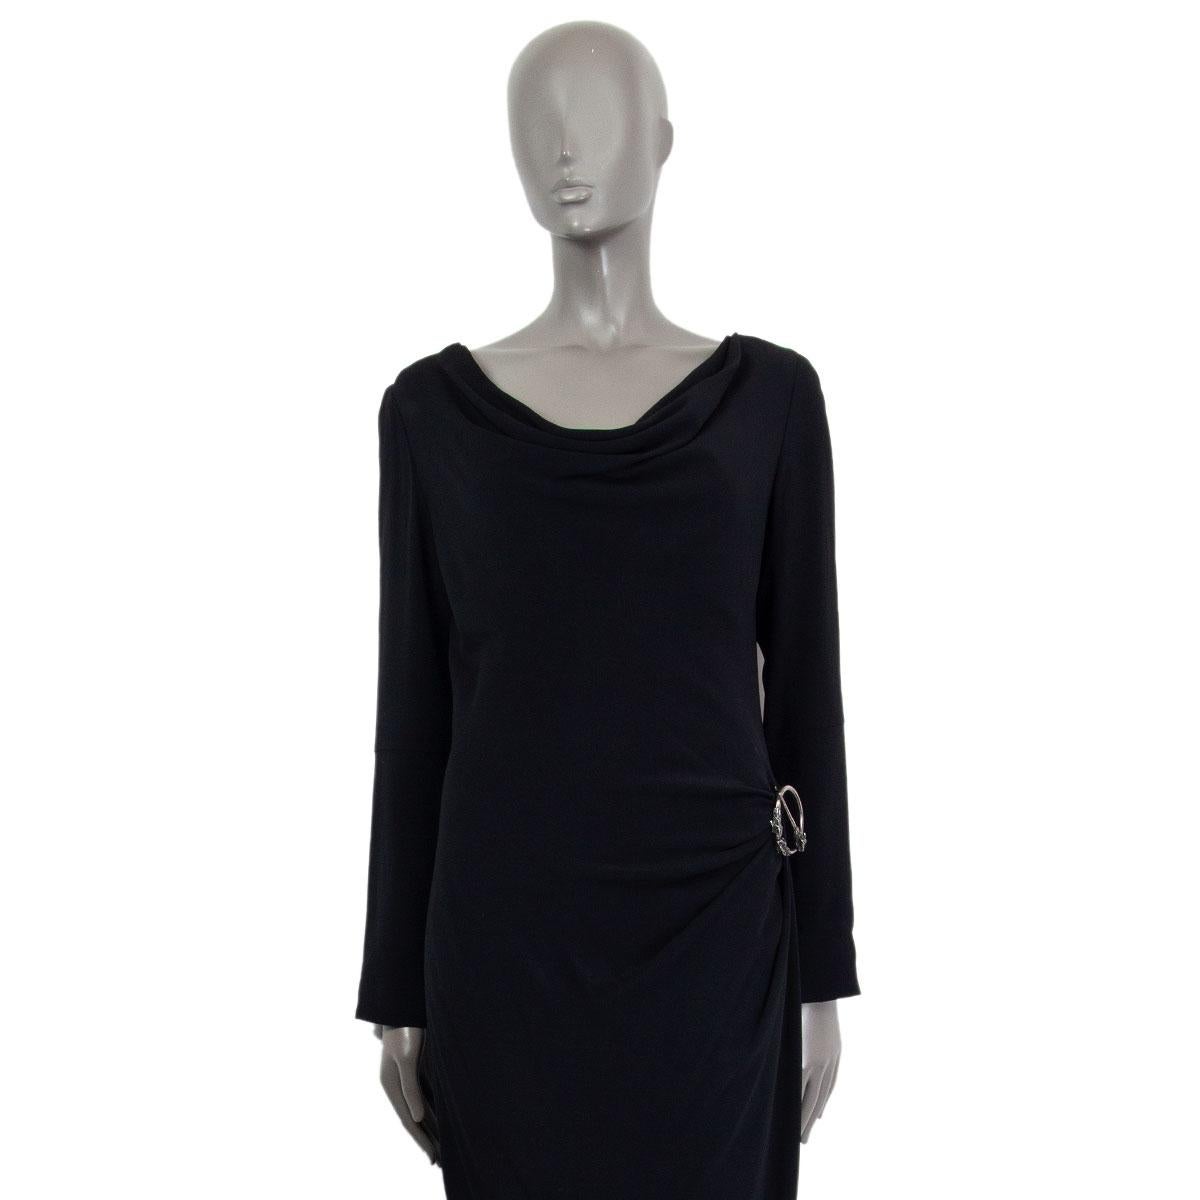 100% authentic Alexander McQueen draped dress in black acetate (50%) and viscose (50%) with a loose neck, long sleeves and a removable embossed brooch. Closes on the back with zipper. Lined in viscose (57%) and polyester (43%). Has been worn and is